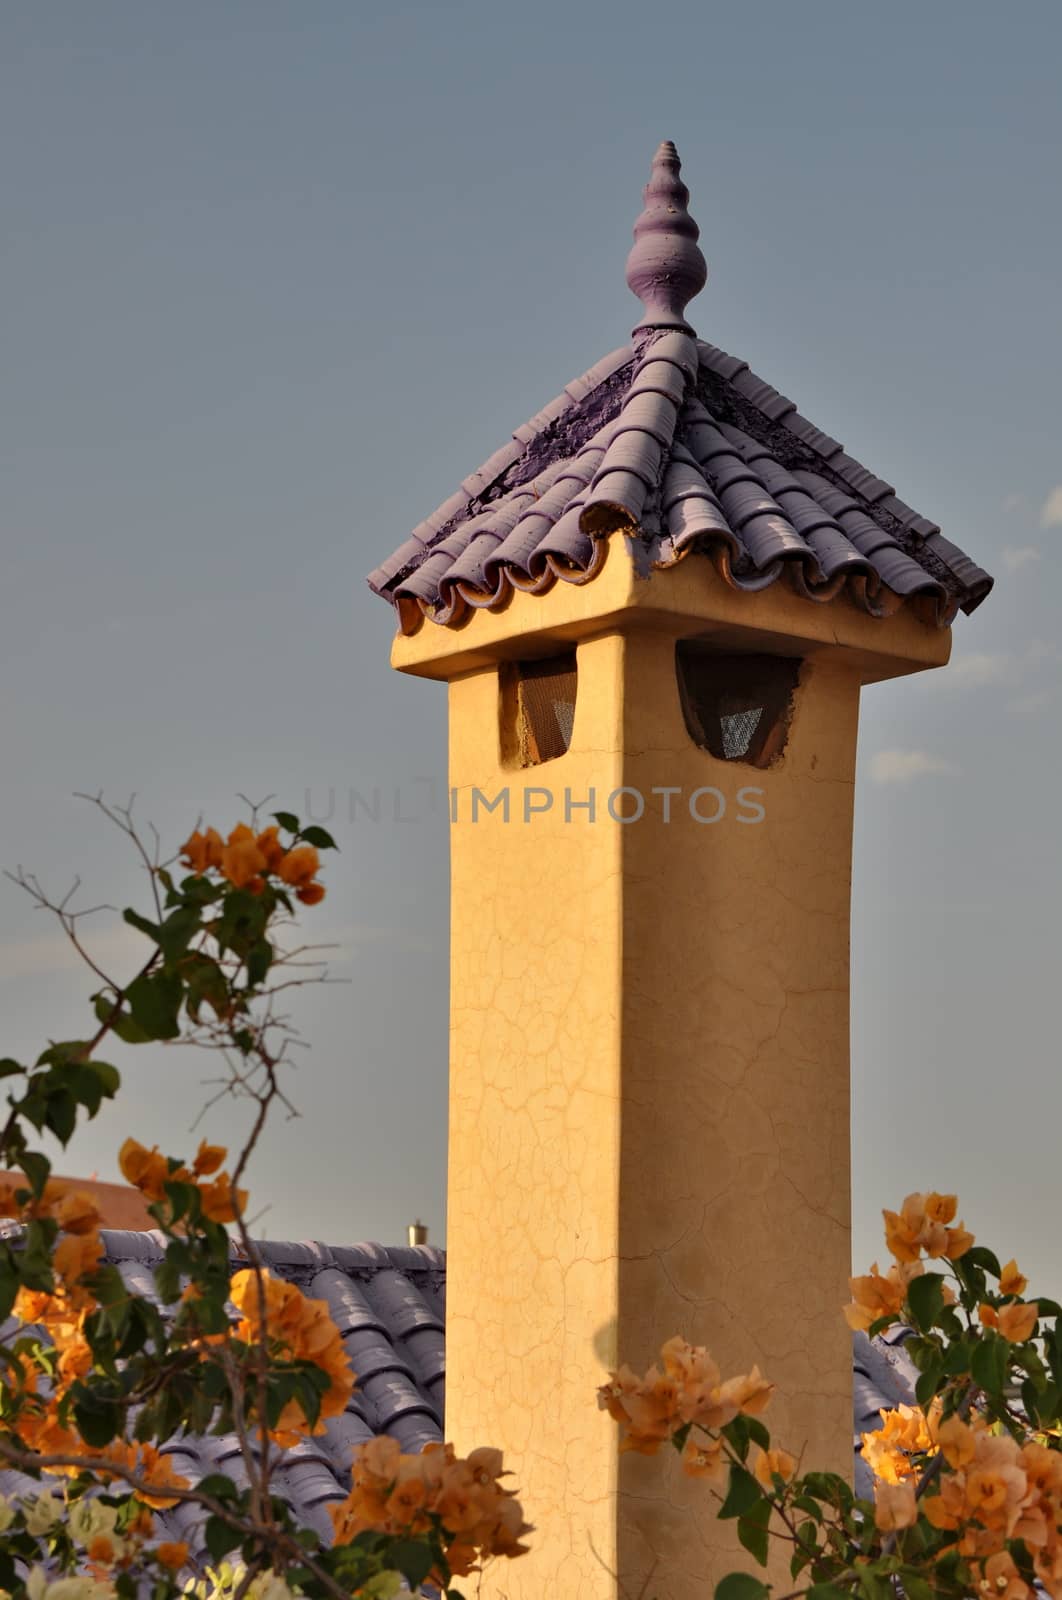 Arabic style chimney in Morocco by anderm